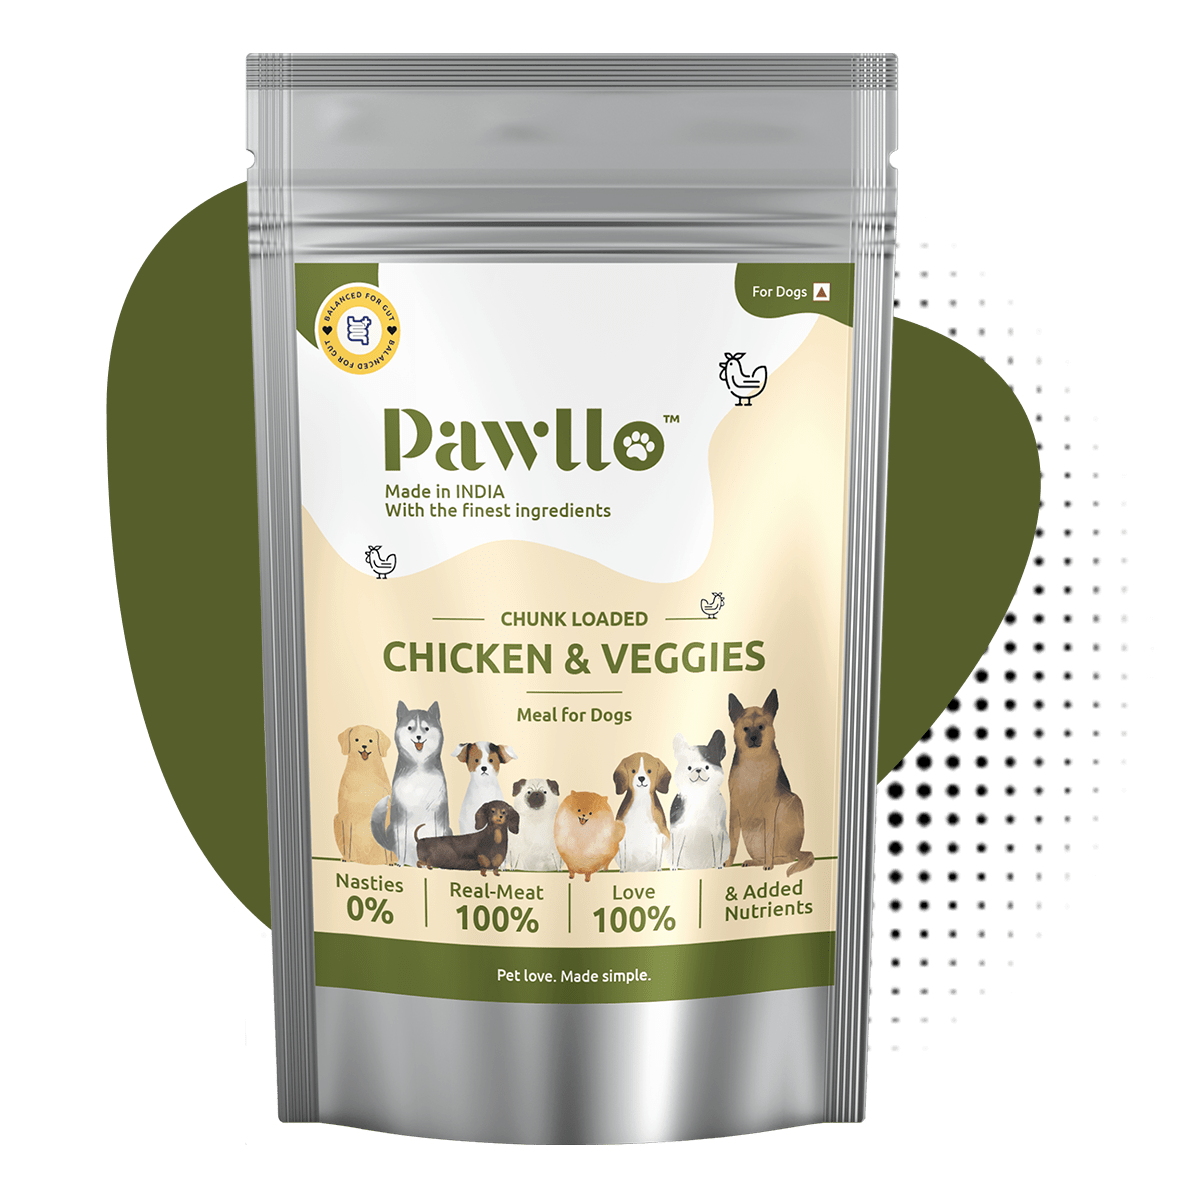 Chicken and Veggies Gravy (Dogs) Omega-3 Enriched, Protein-Packed Meal with Nutrient-Rich Vegetables